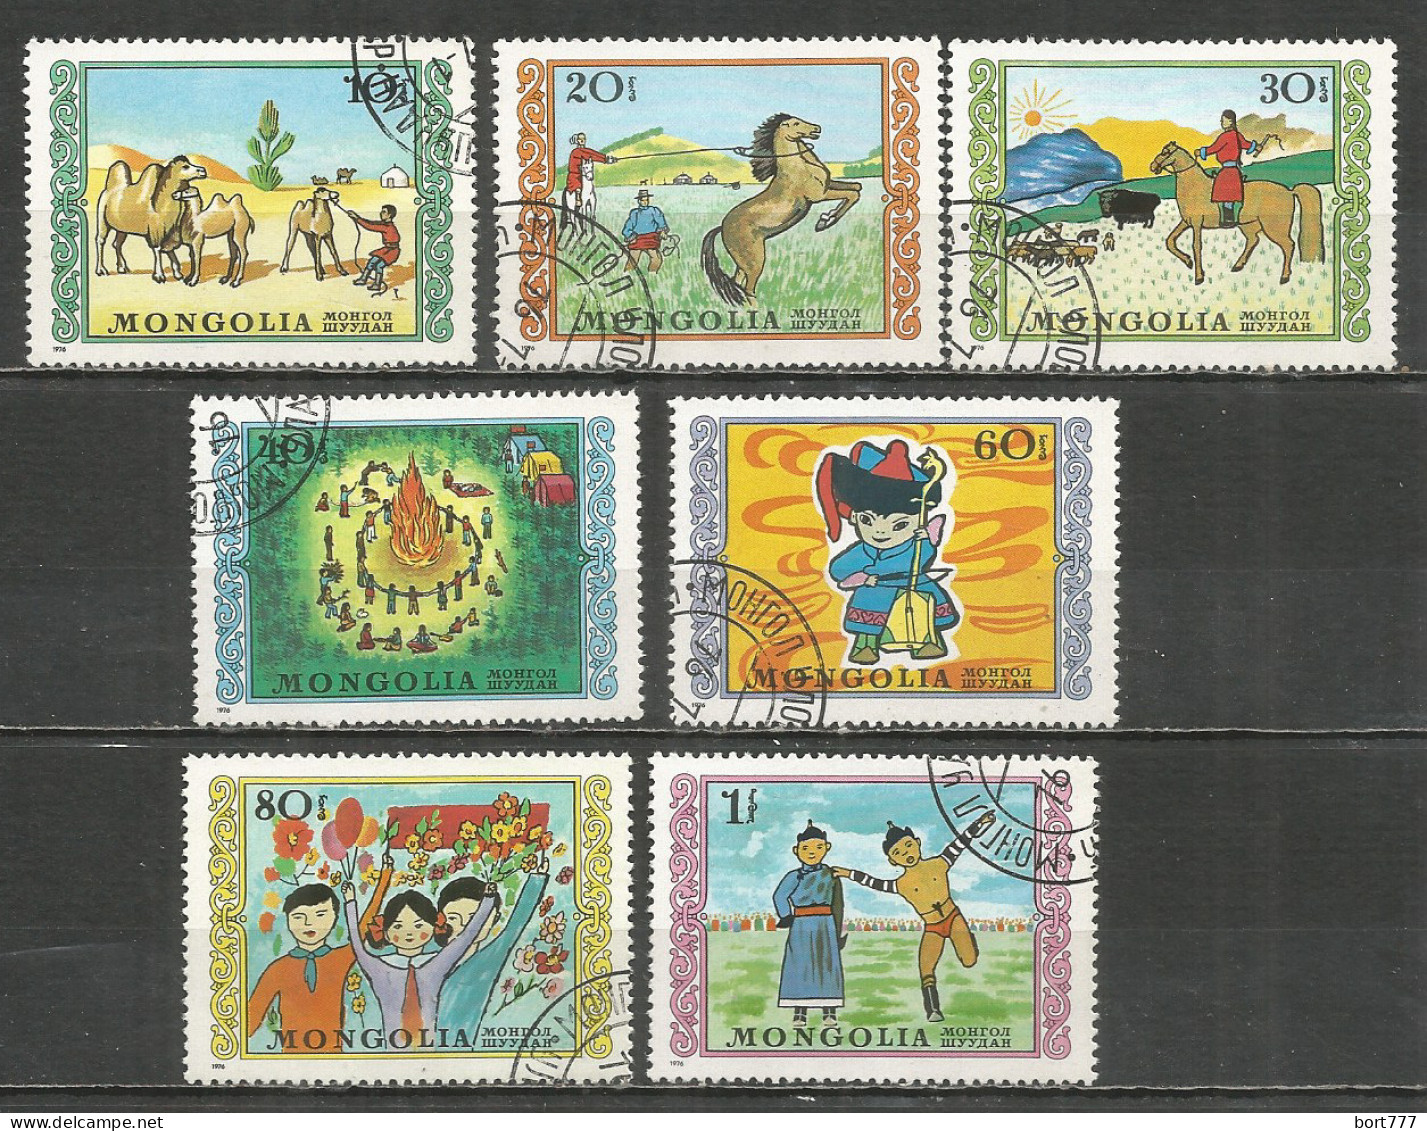 Mongolia 1976 Used Stamps CTO  - Mongolie